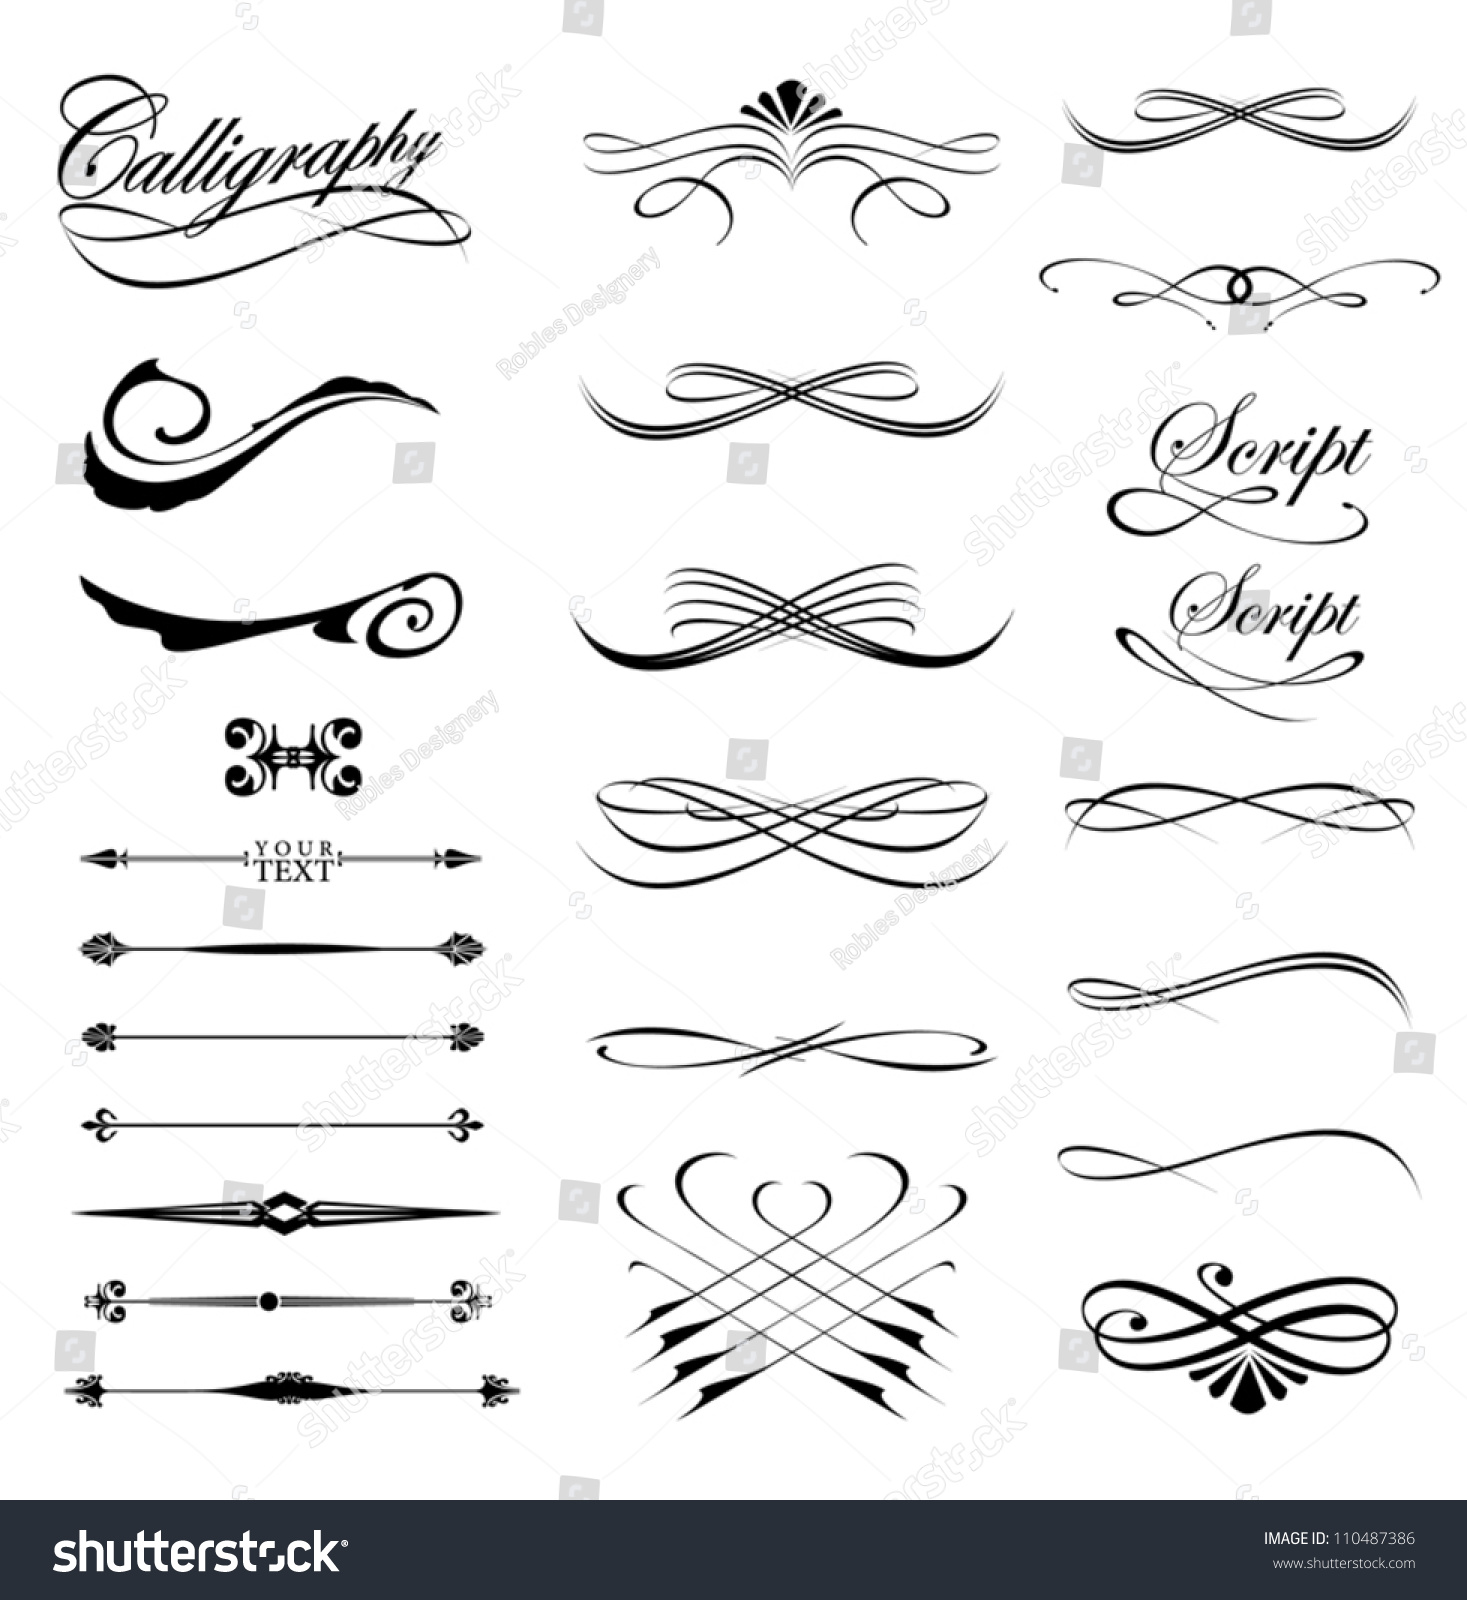 Calligraphic Lines Dividers And Hand Drawn Design Elements Stock Vector ...